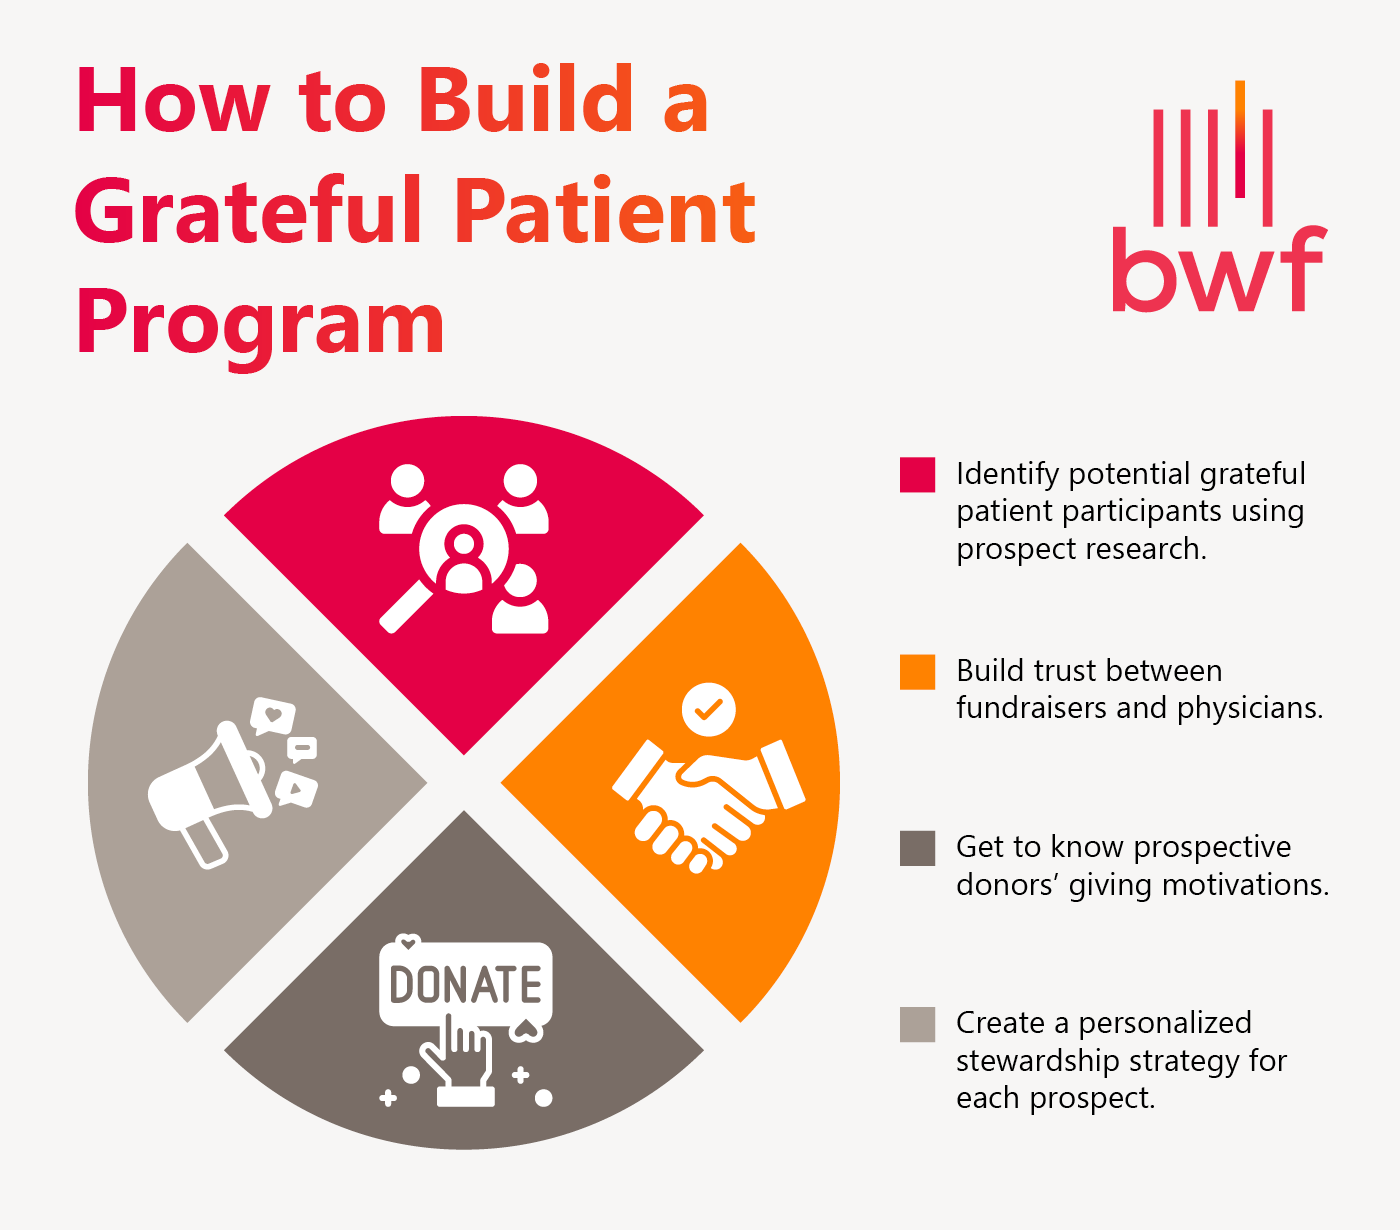 This image shows the steps of building a grateful patient program to support healthcare fundraising (explained in the bulleted list below).